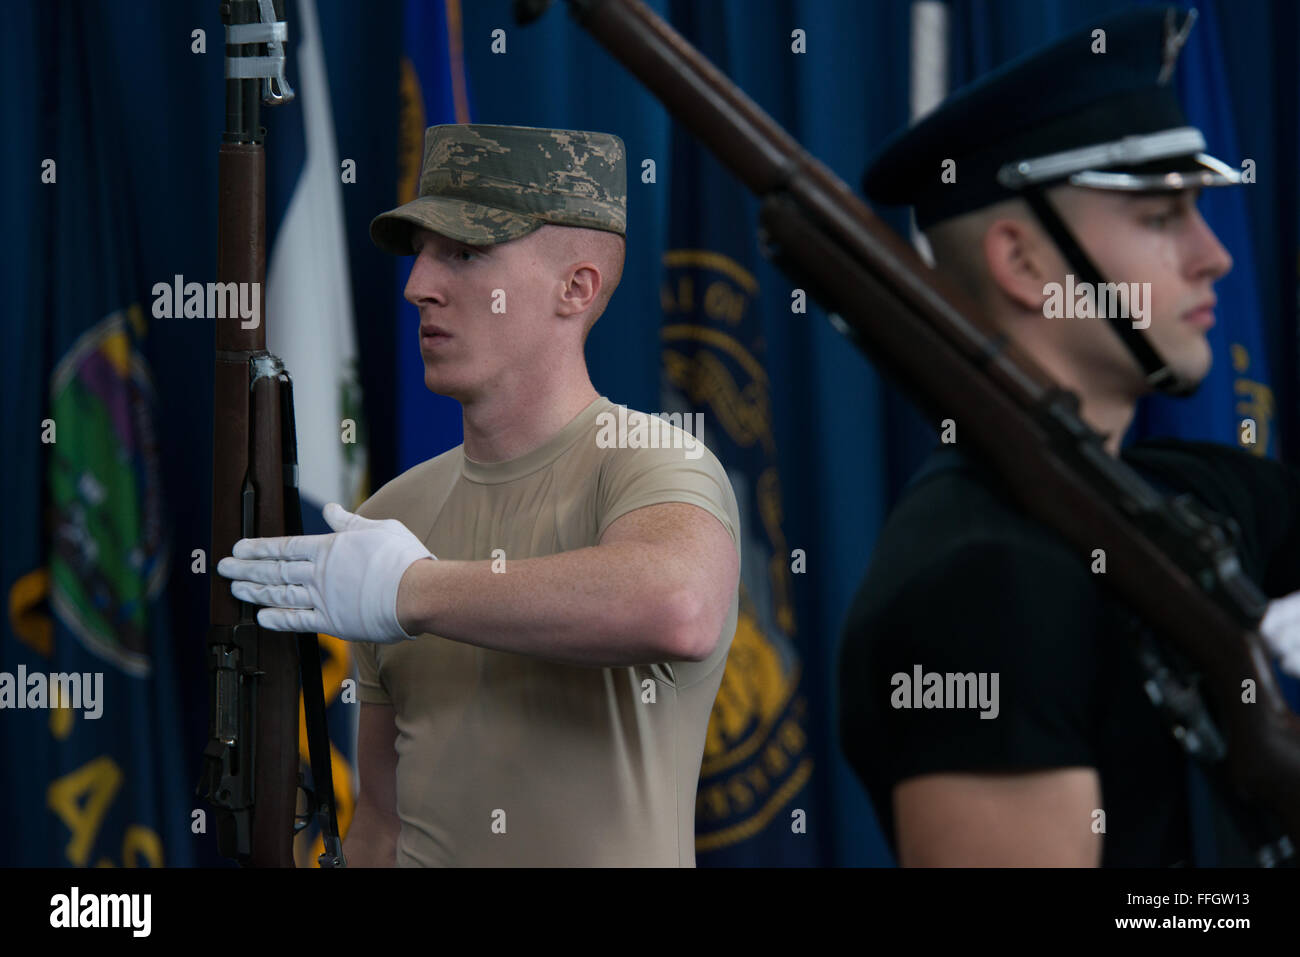 Staff Sgt. Alexander Wilson, drill team NCO in charge of training, throws a rifle during a U.S. Air Force Honor Guard Drill Team's 4-rifle team qualification test for Airman 1st Class Larry Brown at Joint Base Anacostia-Bolling, Md. Stock Photo